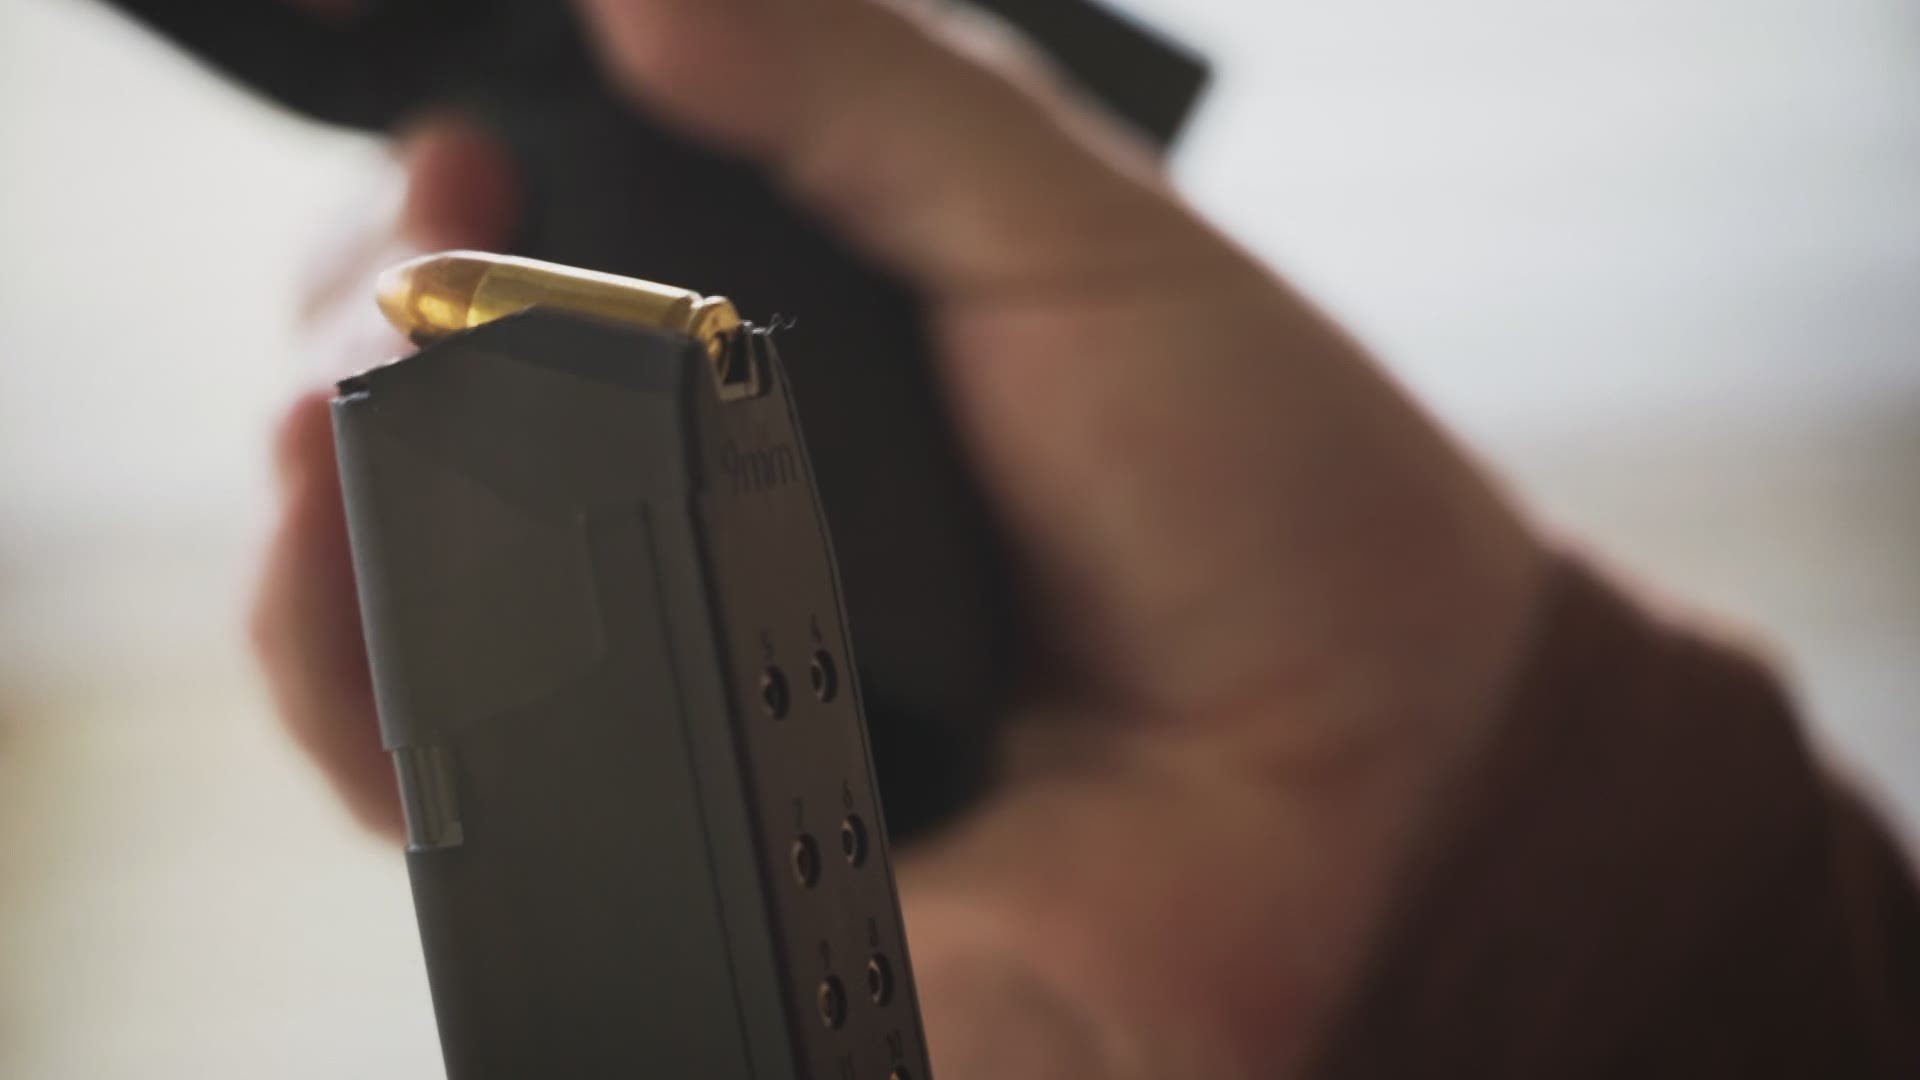 Manufacturers are struggling to keep up with the demand for more ammo.